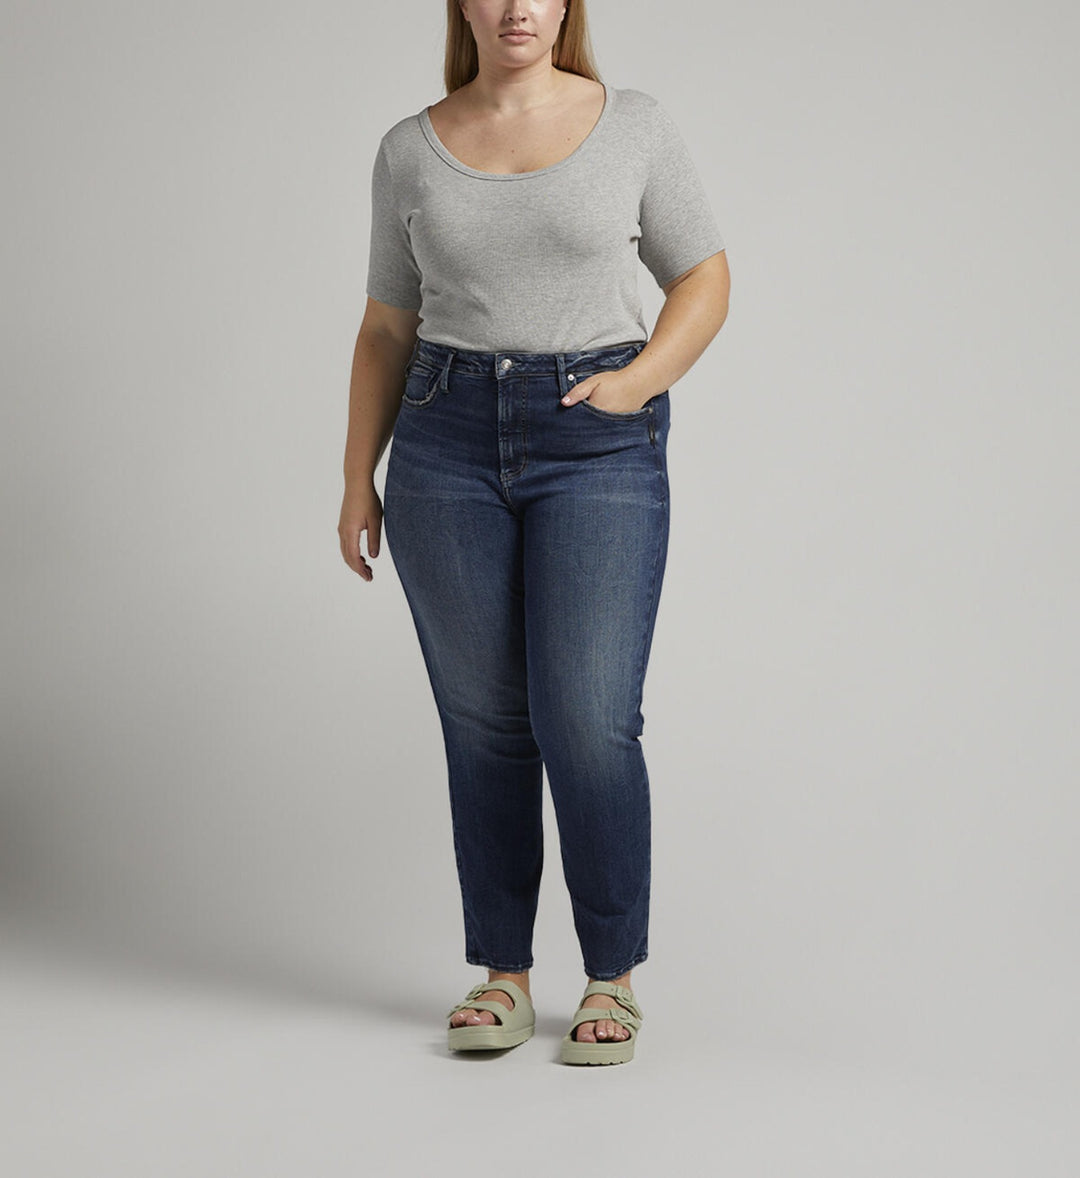 Silver Jeans Plus Size Infinite Fit High Rise Jeans